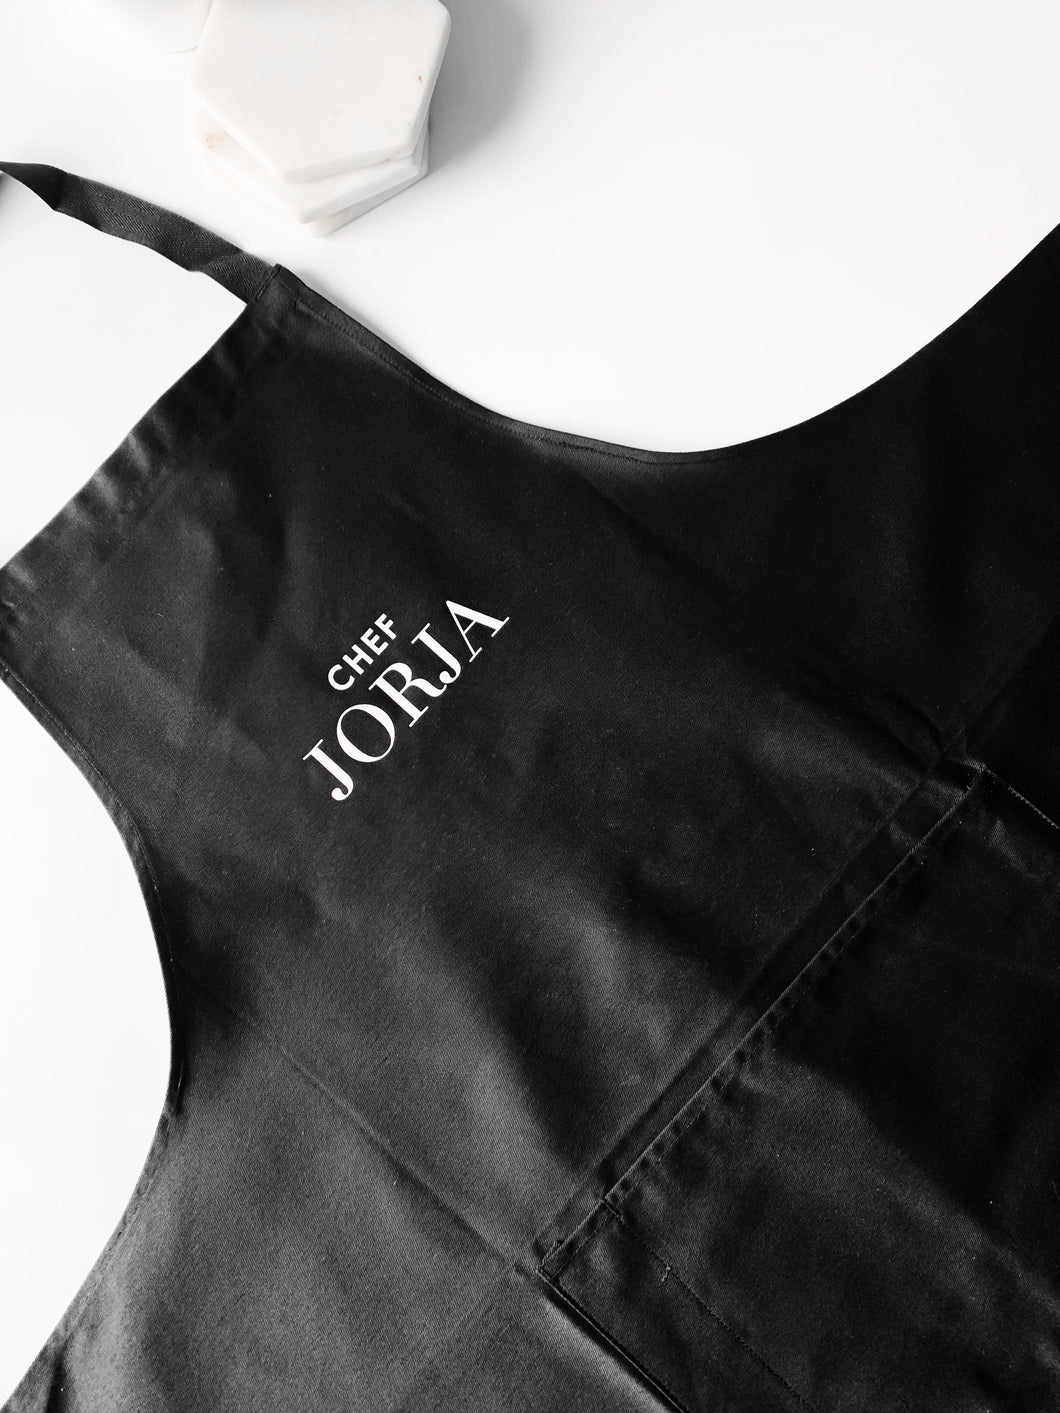 PERSONALISED APRON ~ Assorted Designs Available